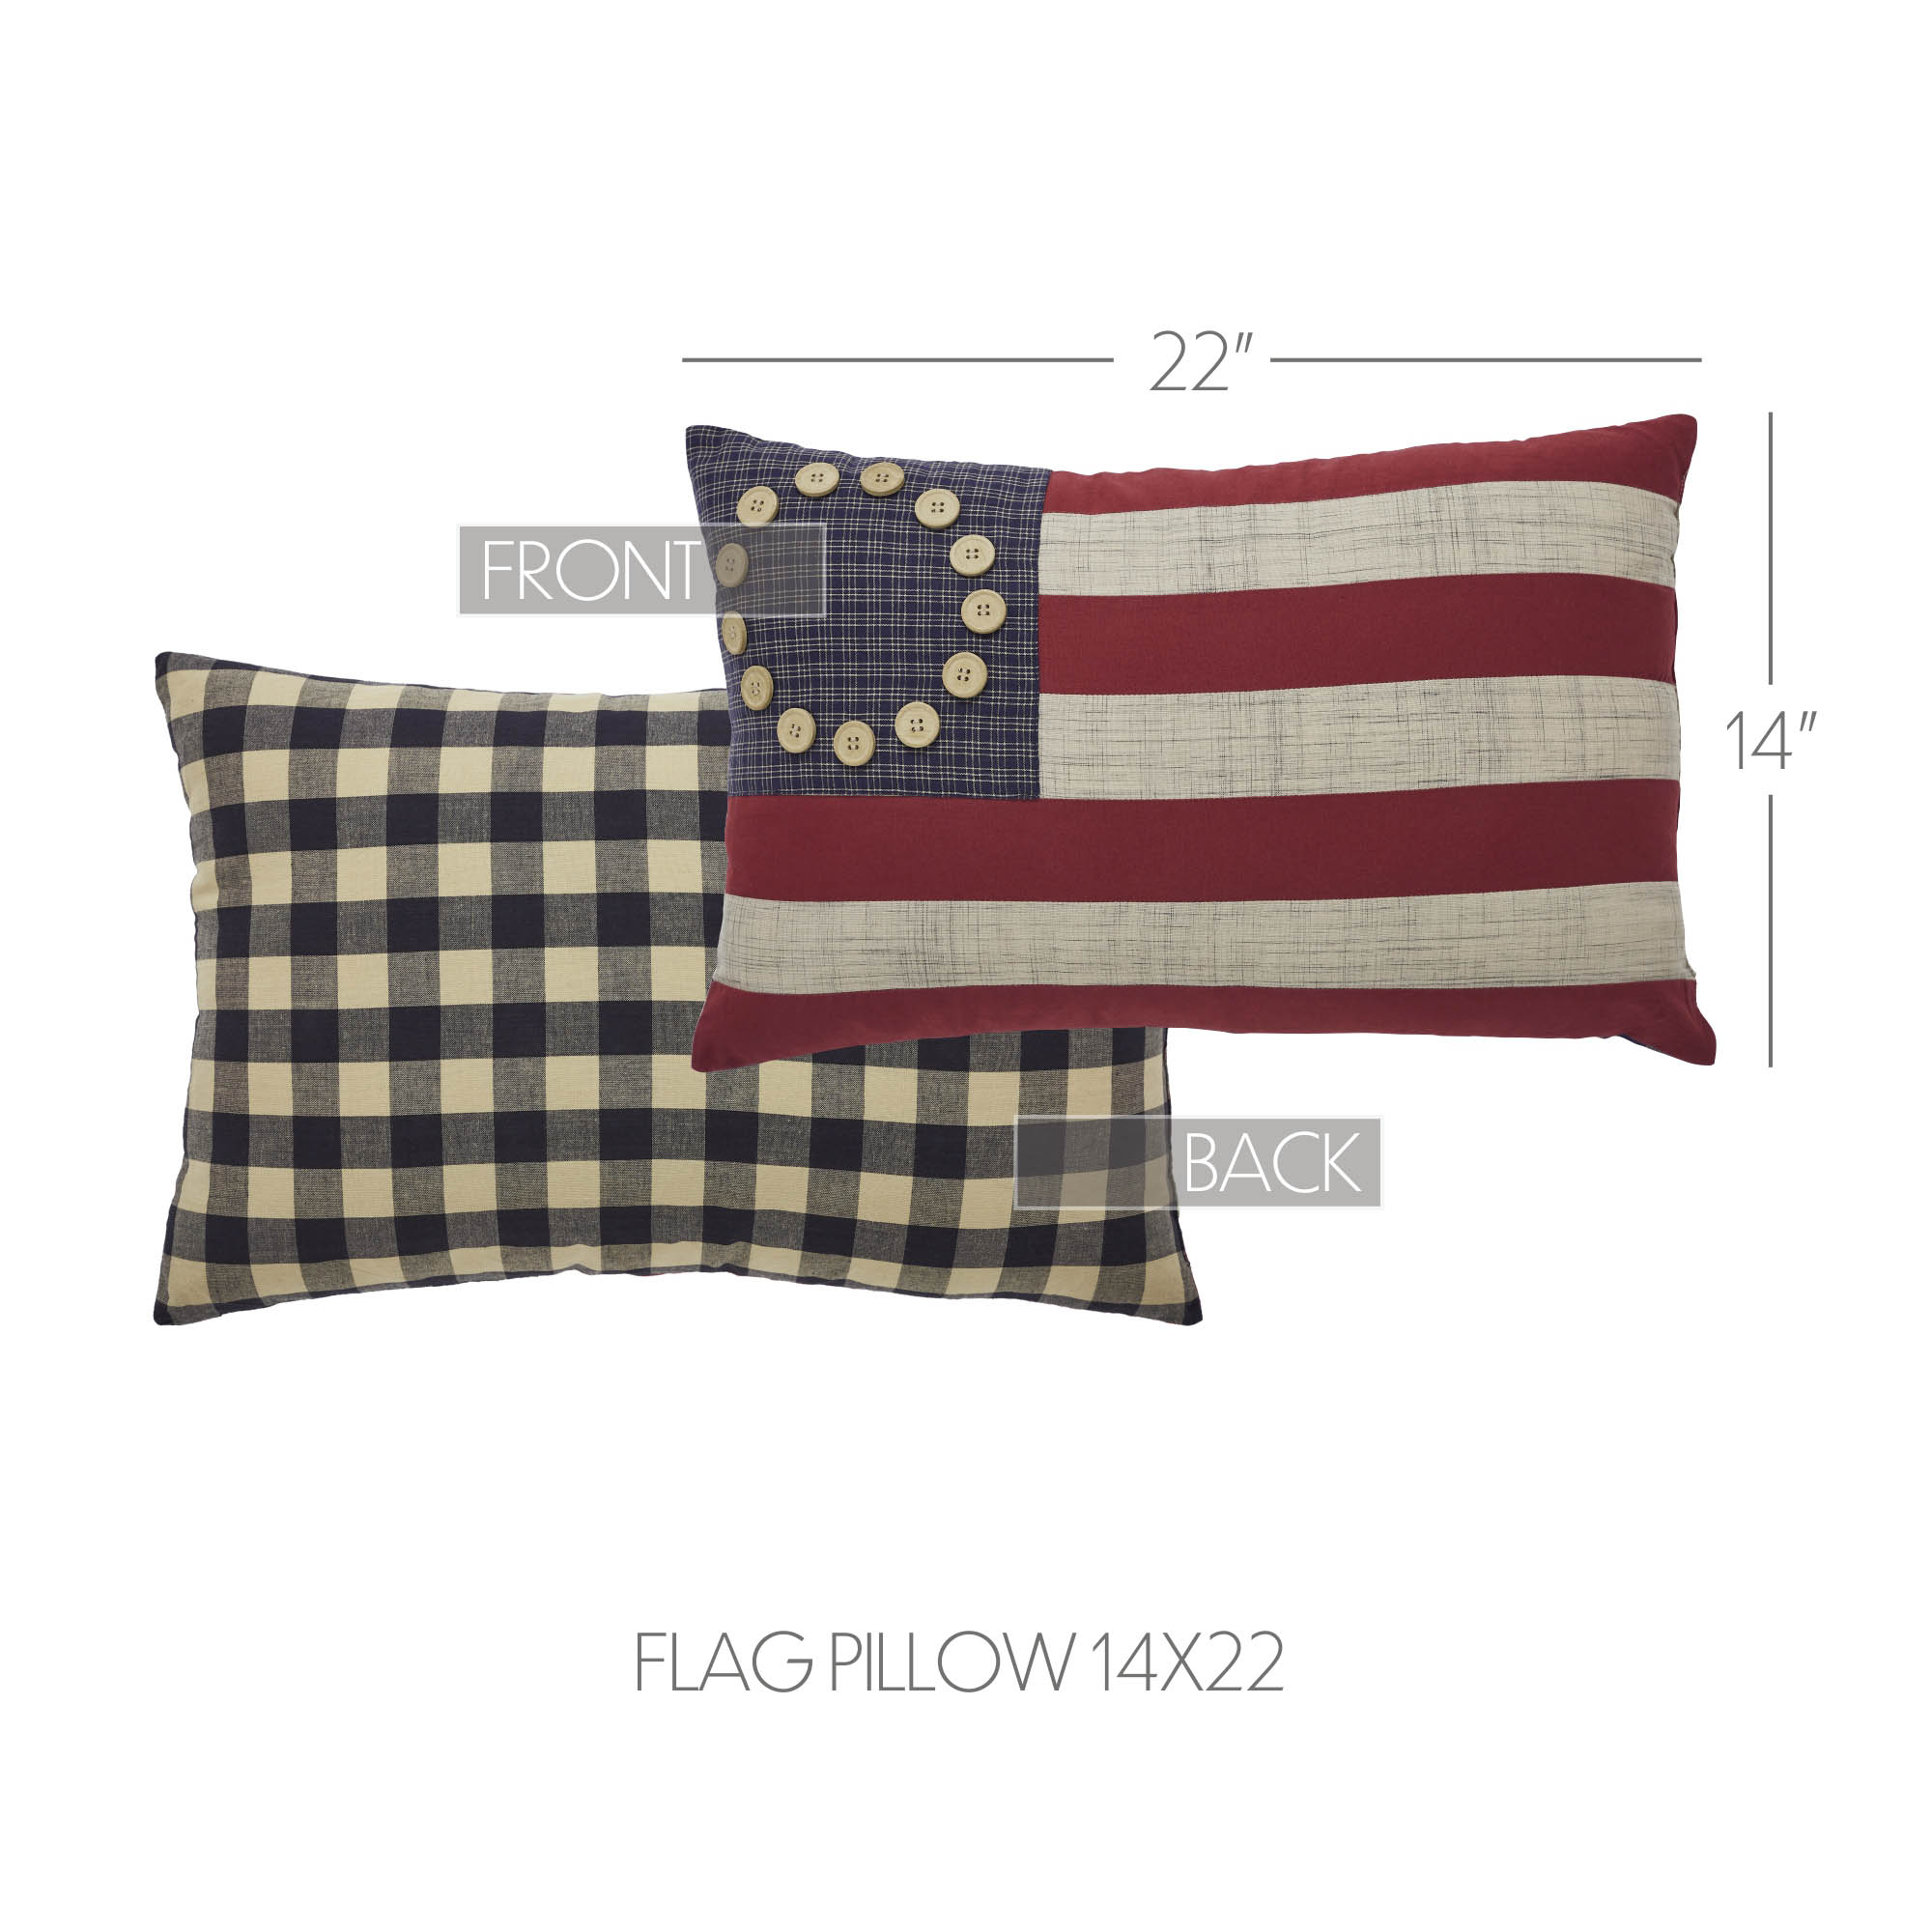 My Country Flag Pillow 14x22 - 84432